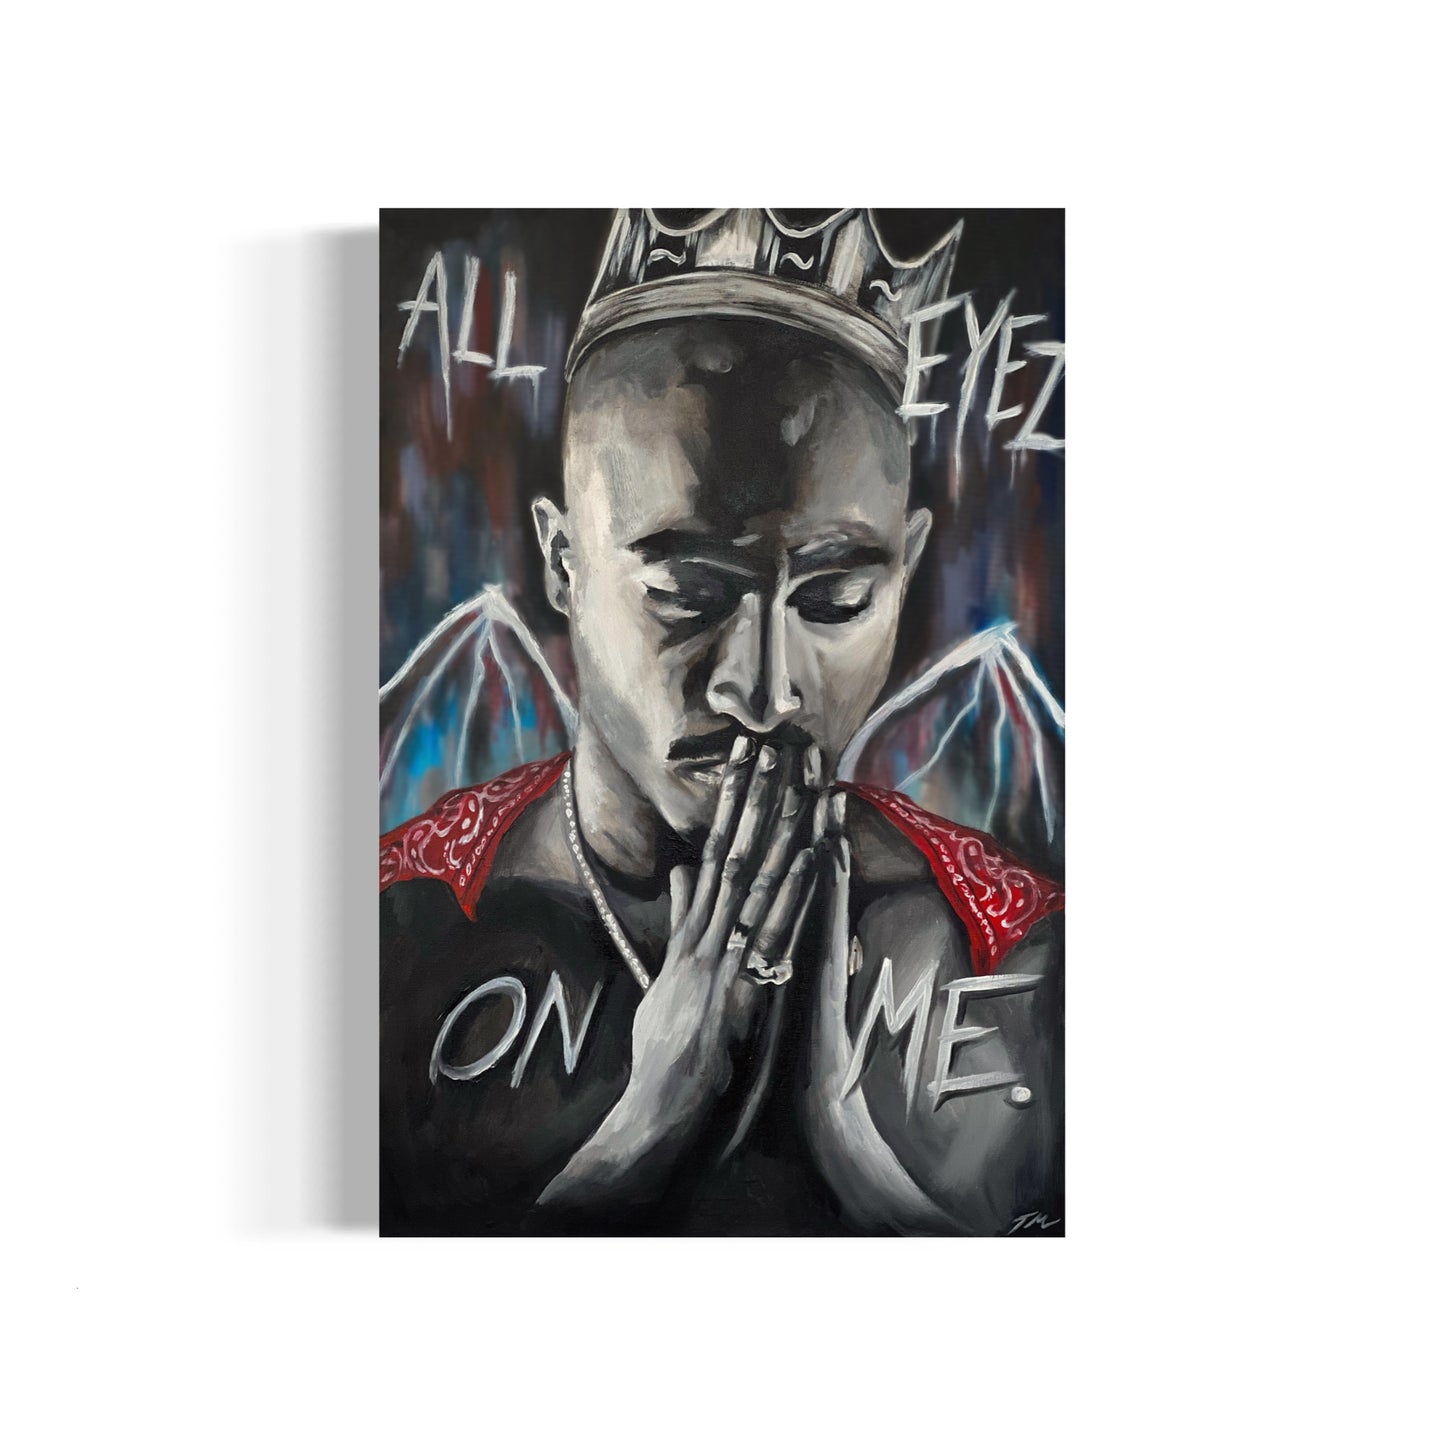 All Eyes On Me - Poster Print